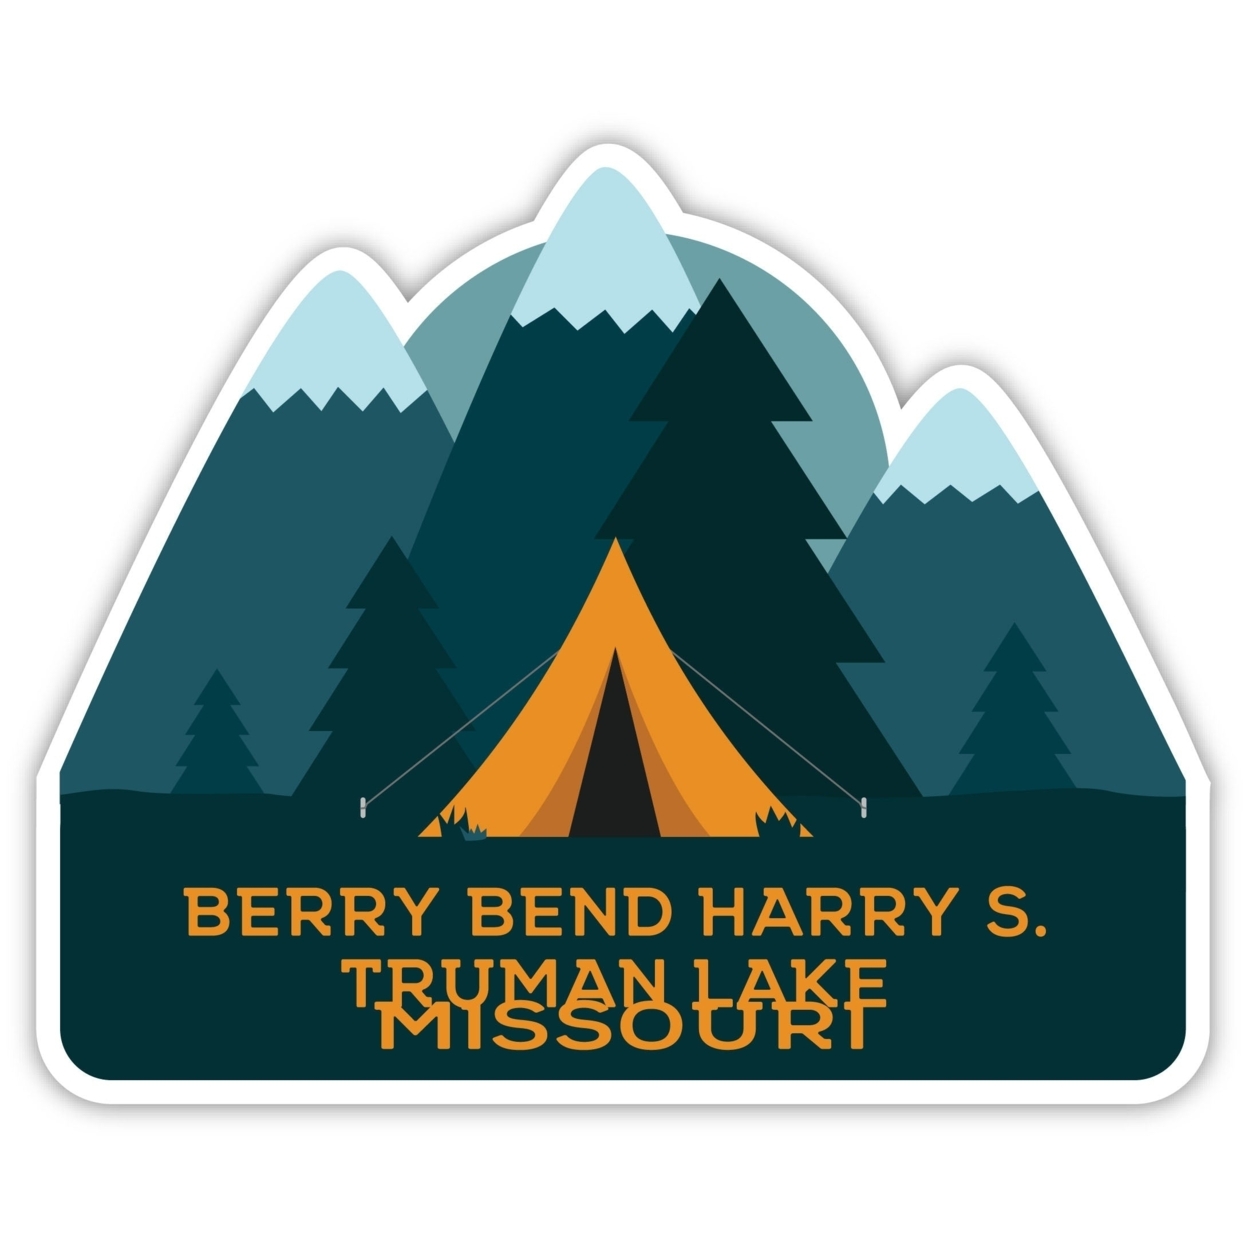 Berry Bend Harry S. Truman Lake Missouri Souvenir Decorative Stickers (Choose Theme And Size) - 4-Pack, 2-Inch, Tent